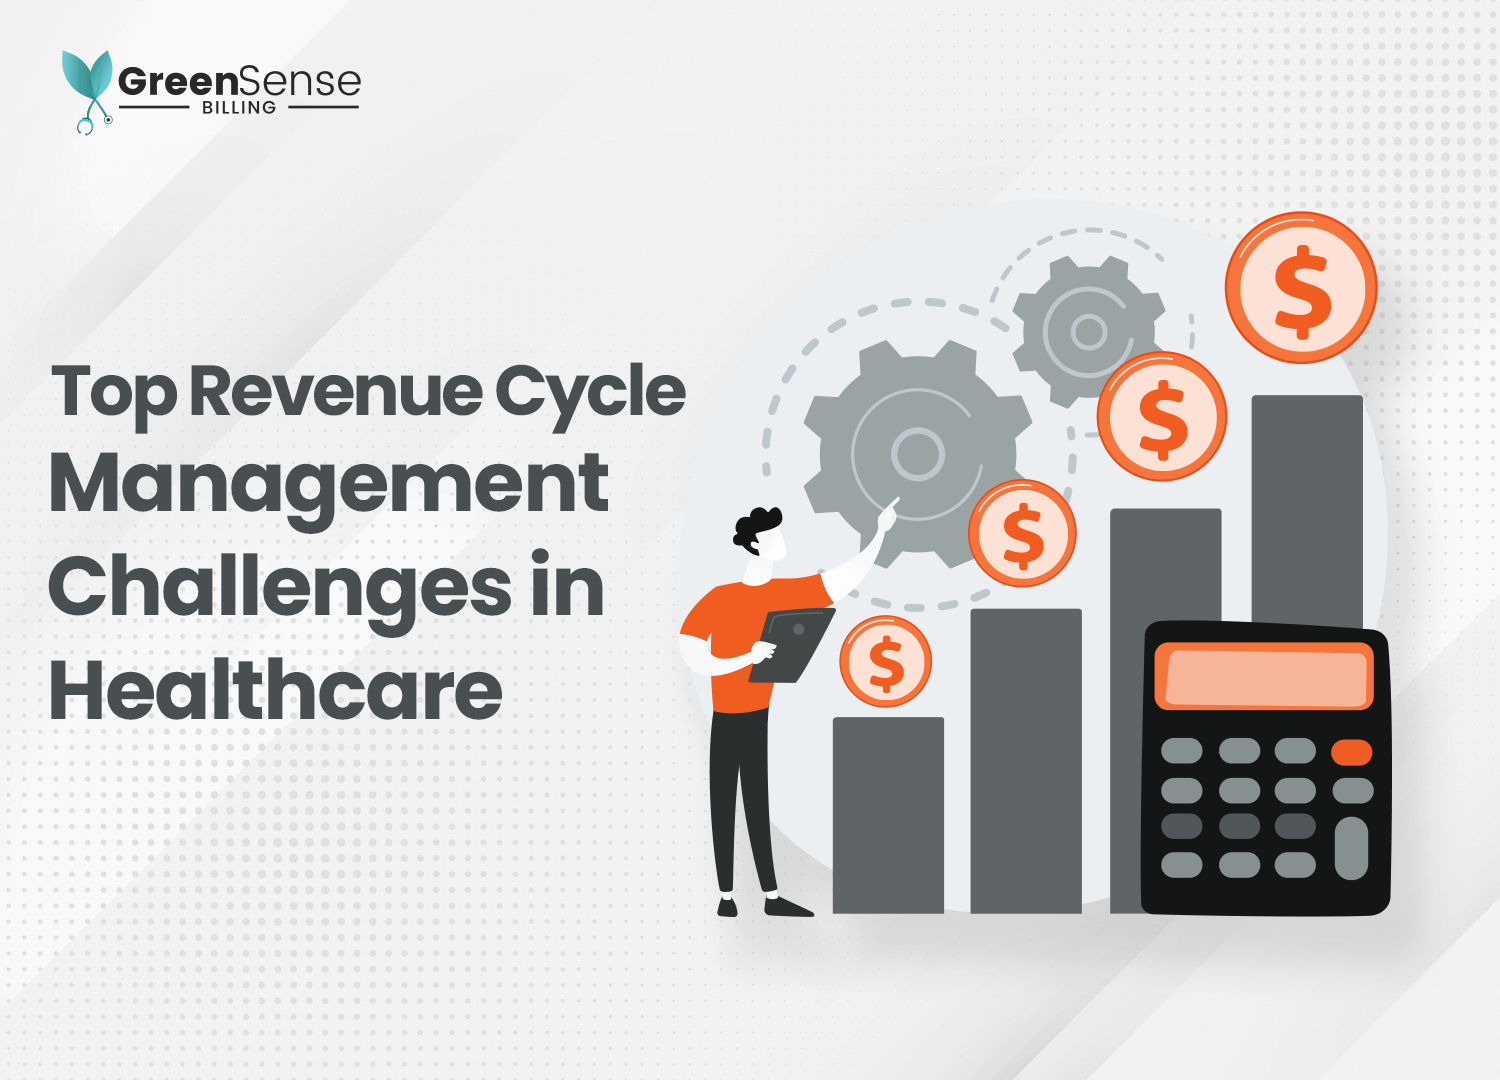 Biggest obstacle to good revenue cycle management